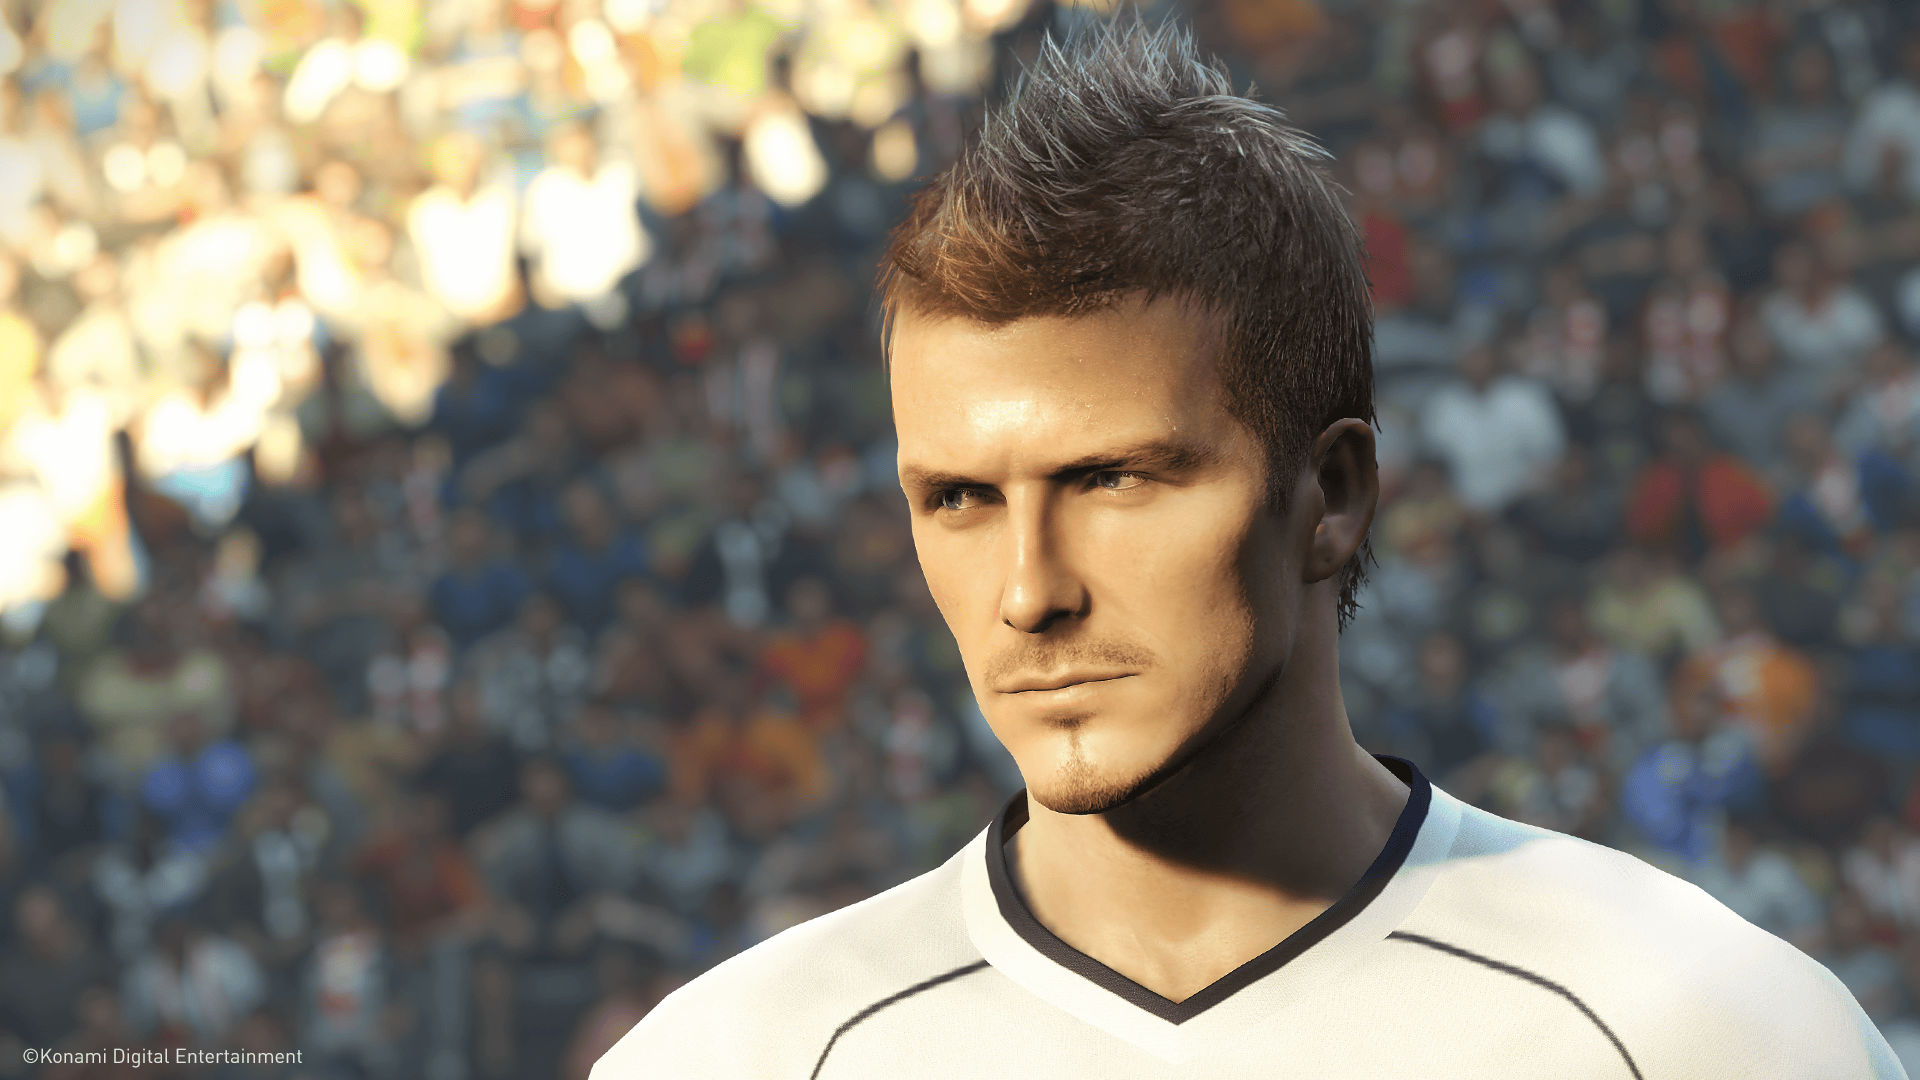 PlayStation Store Hong Kong Leaks First Info/Screenshots For PES 2019